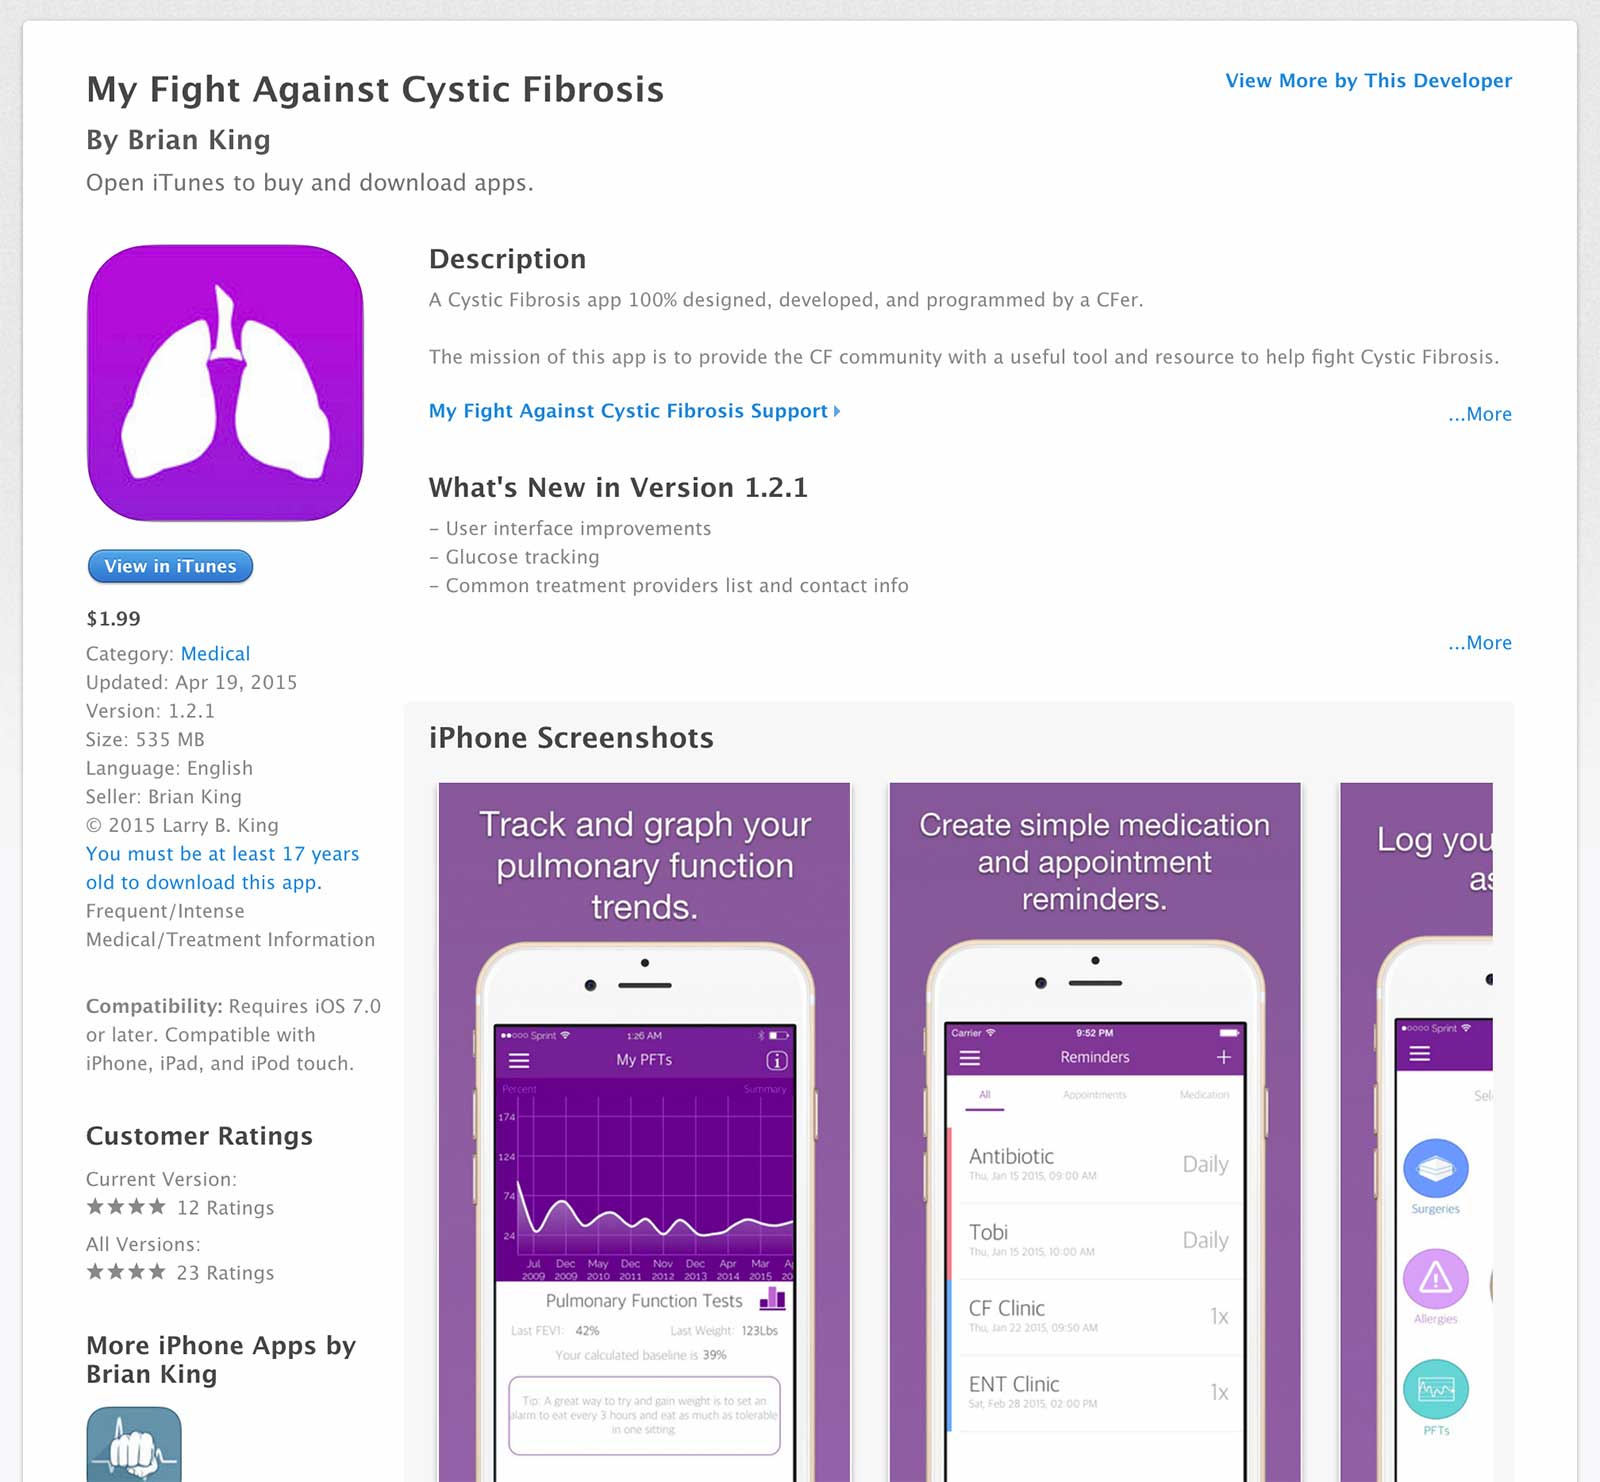 My Fight Against Cystic Fibrosis App